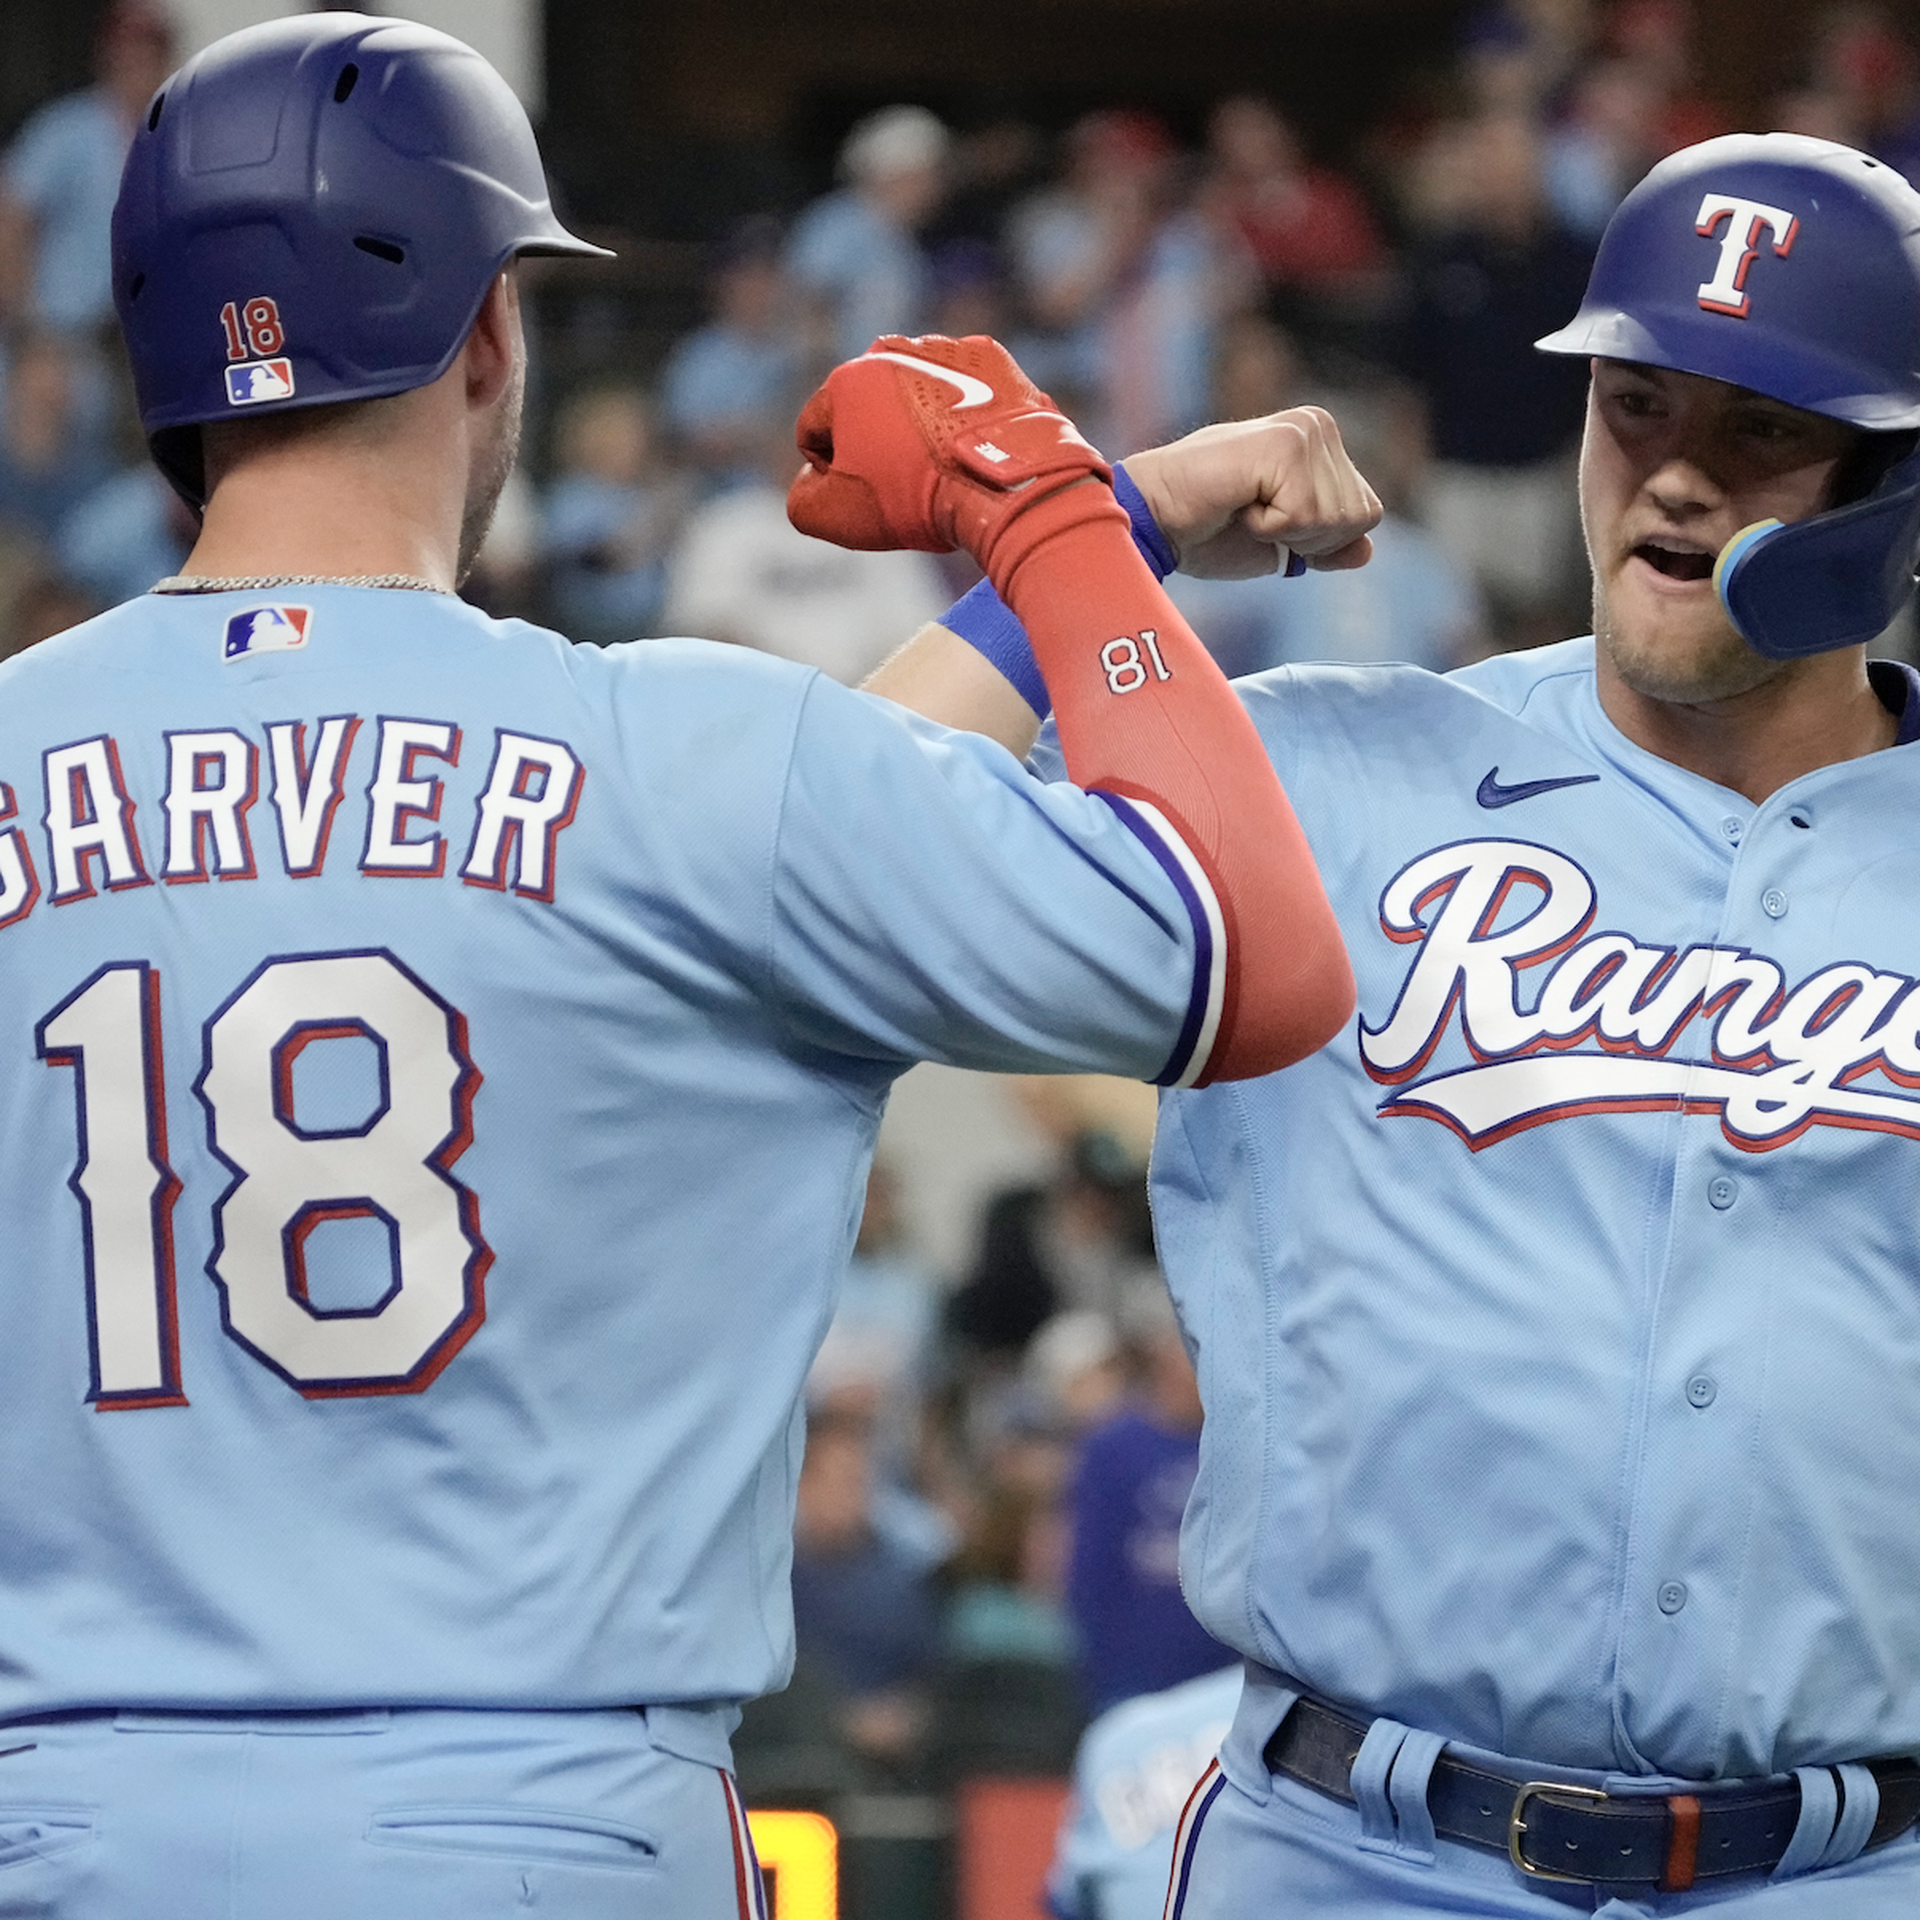 Catch up on all the offseason Texas Rangers moves - Axios Dallas